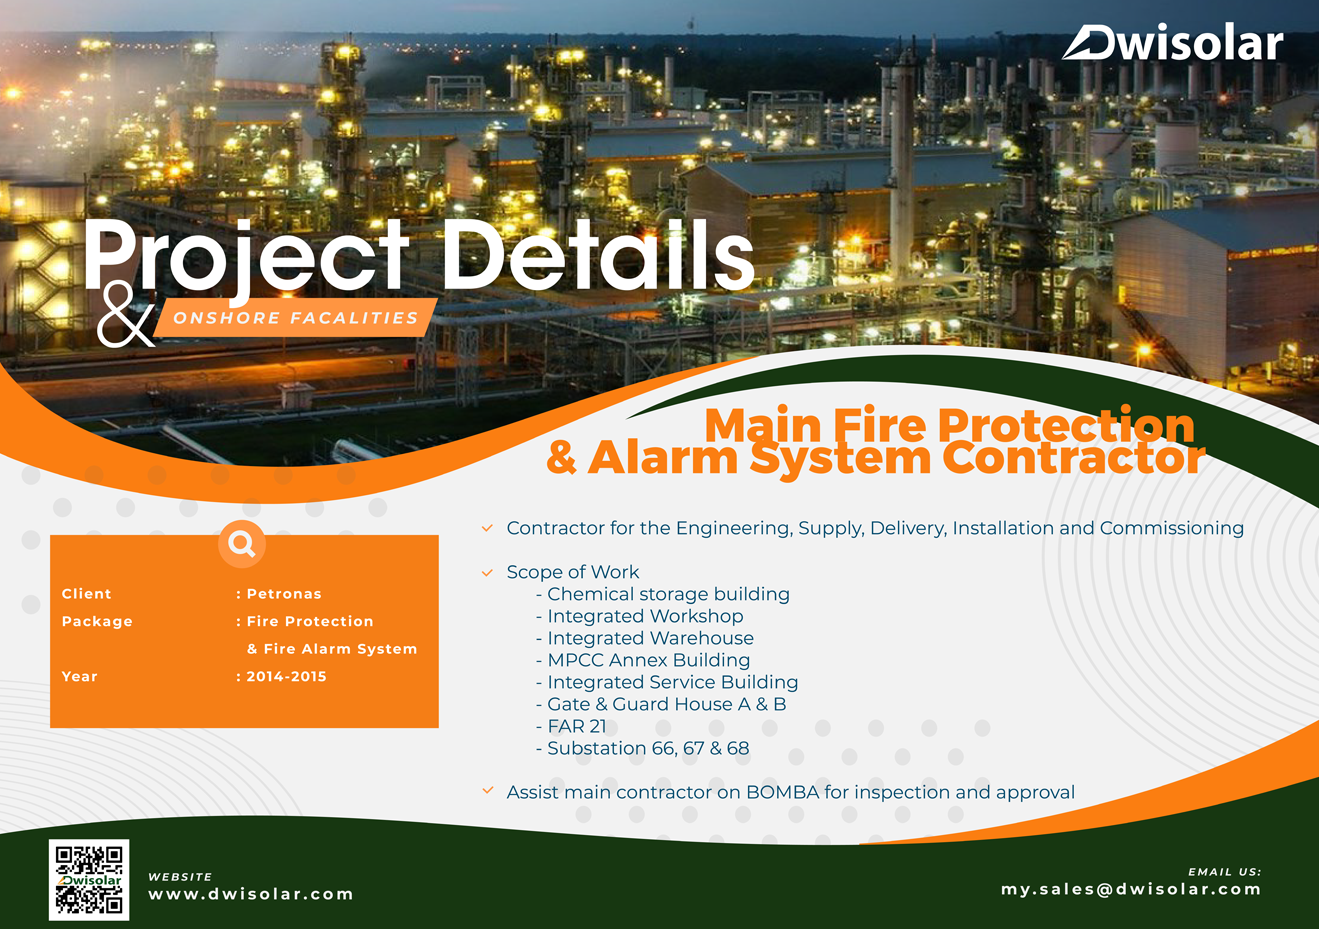 Project Details Onshore Facilities.png